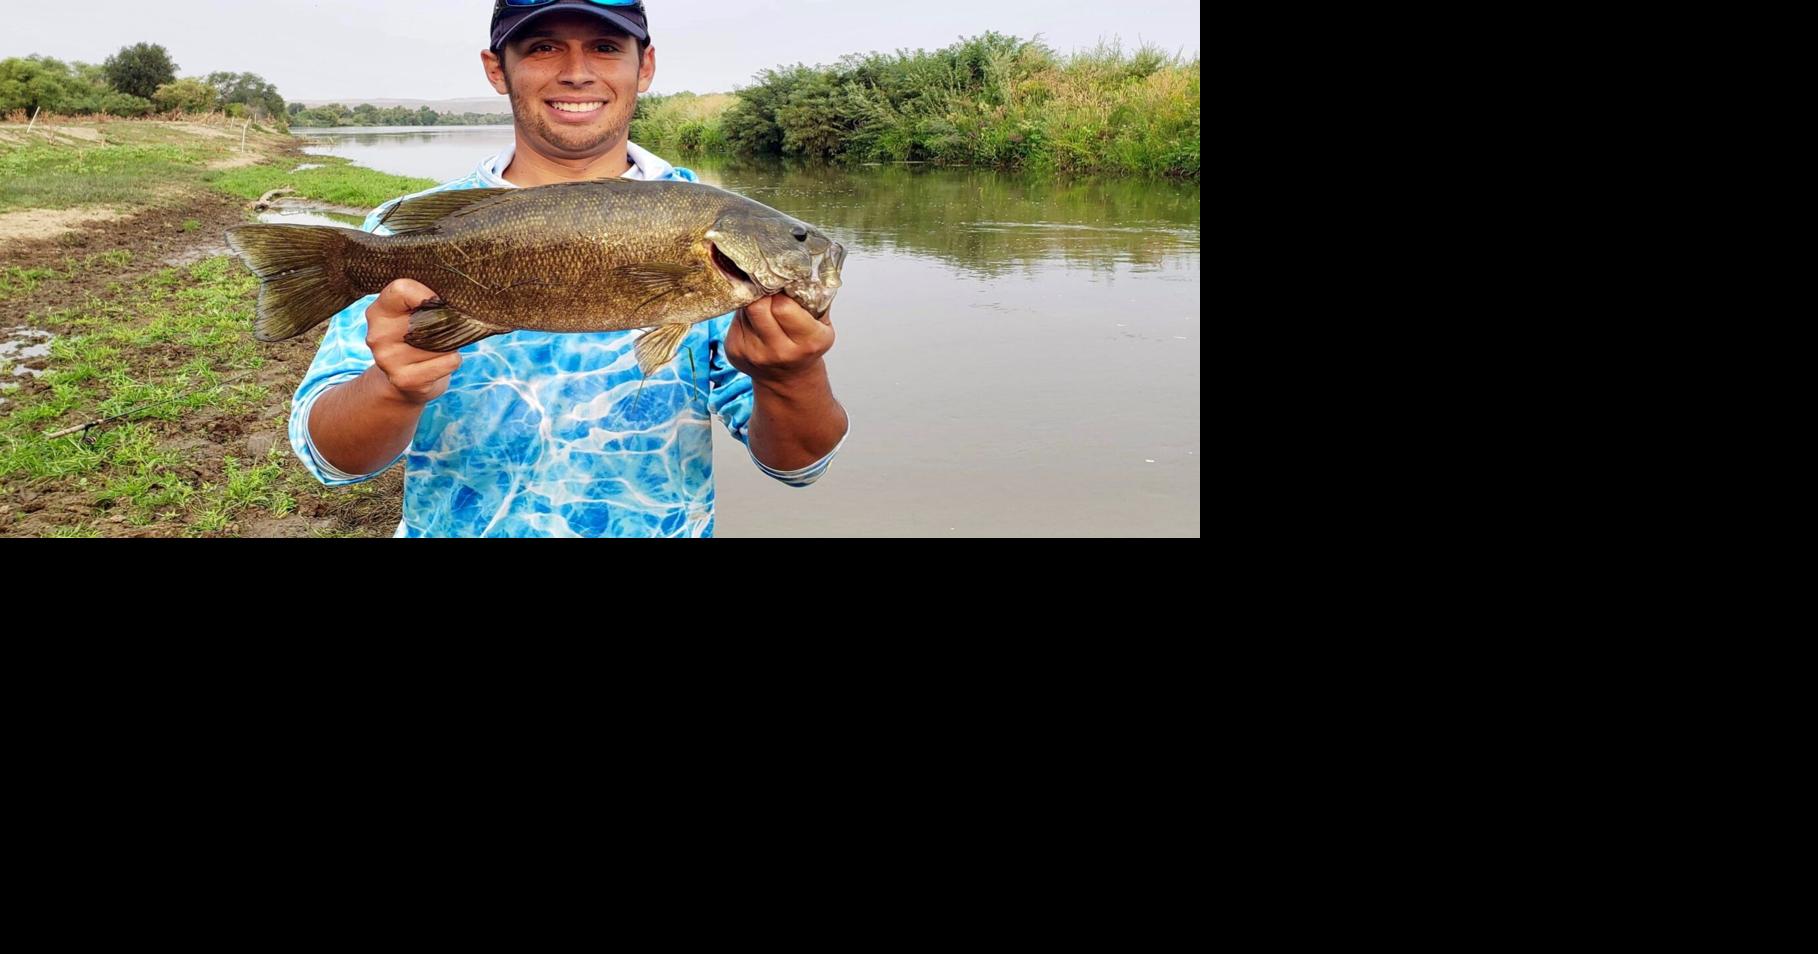 Fishing Column: How to land your lunker: What to do when a big fish strikes